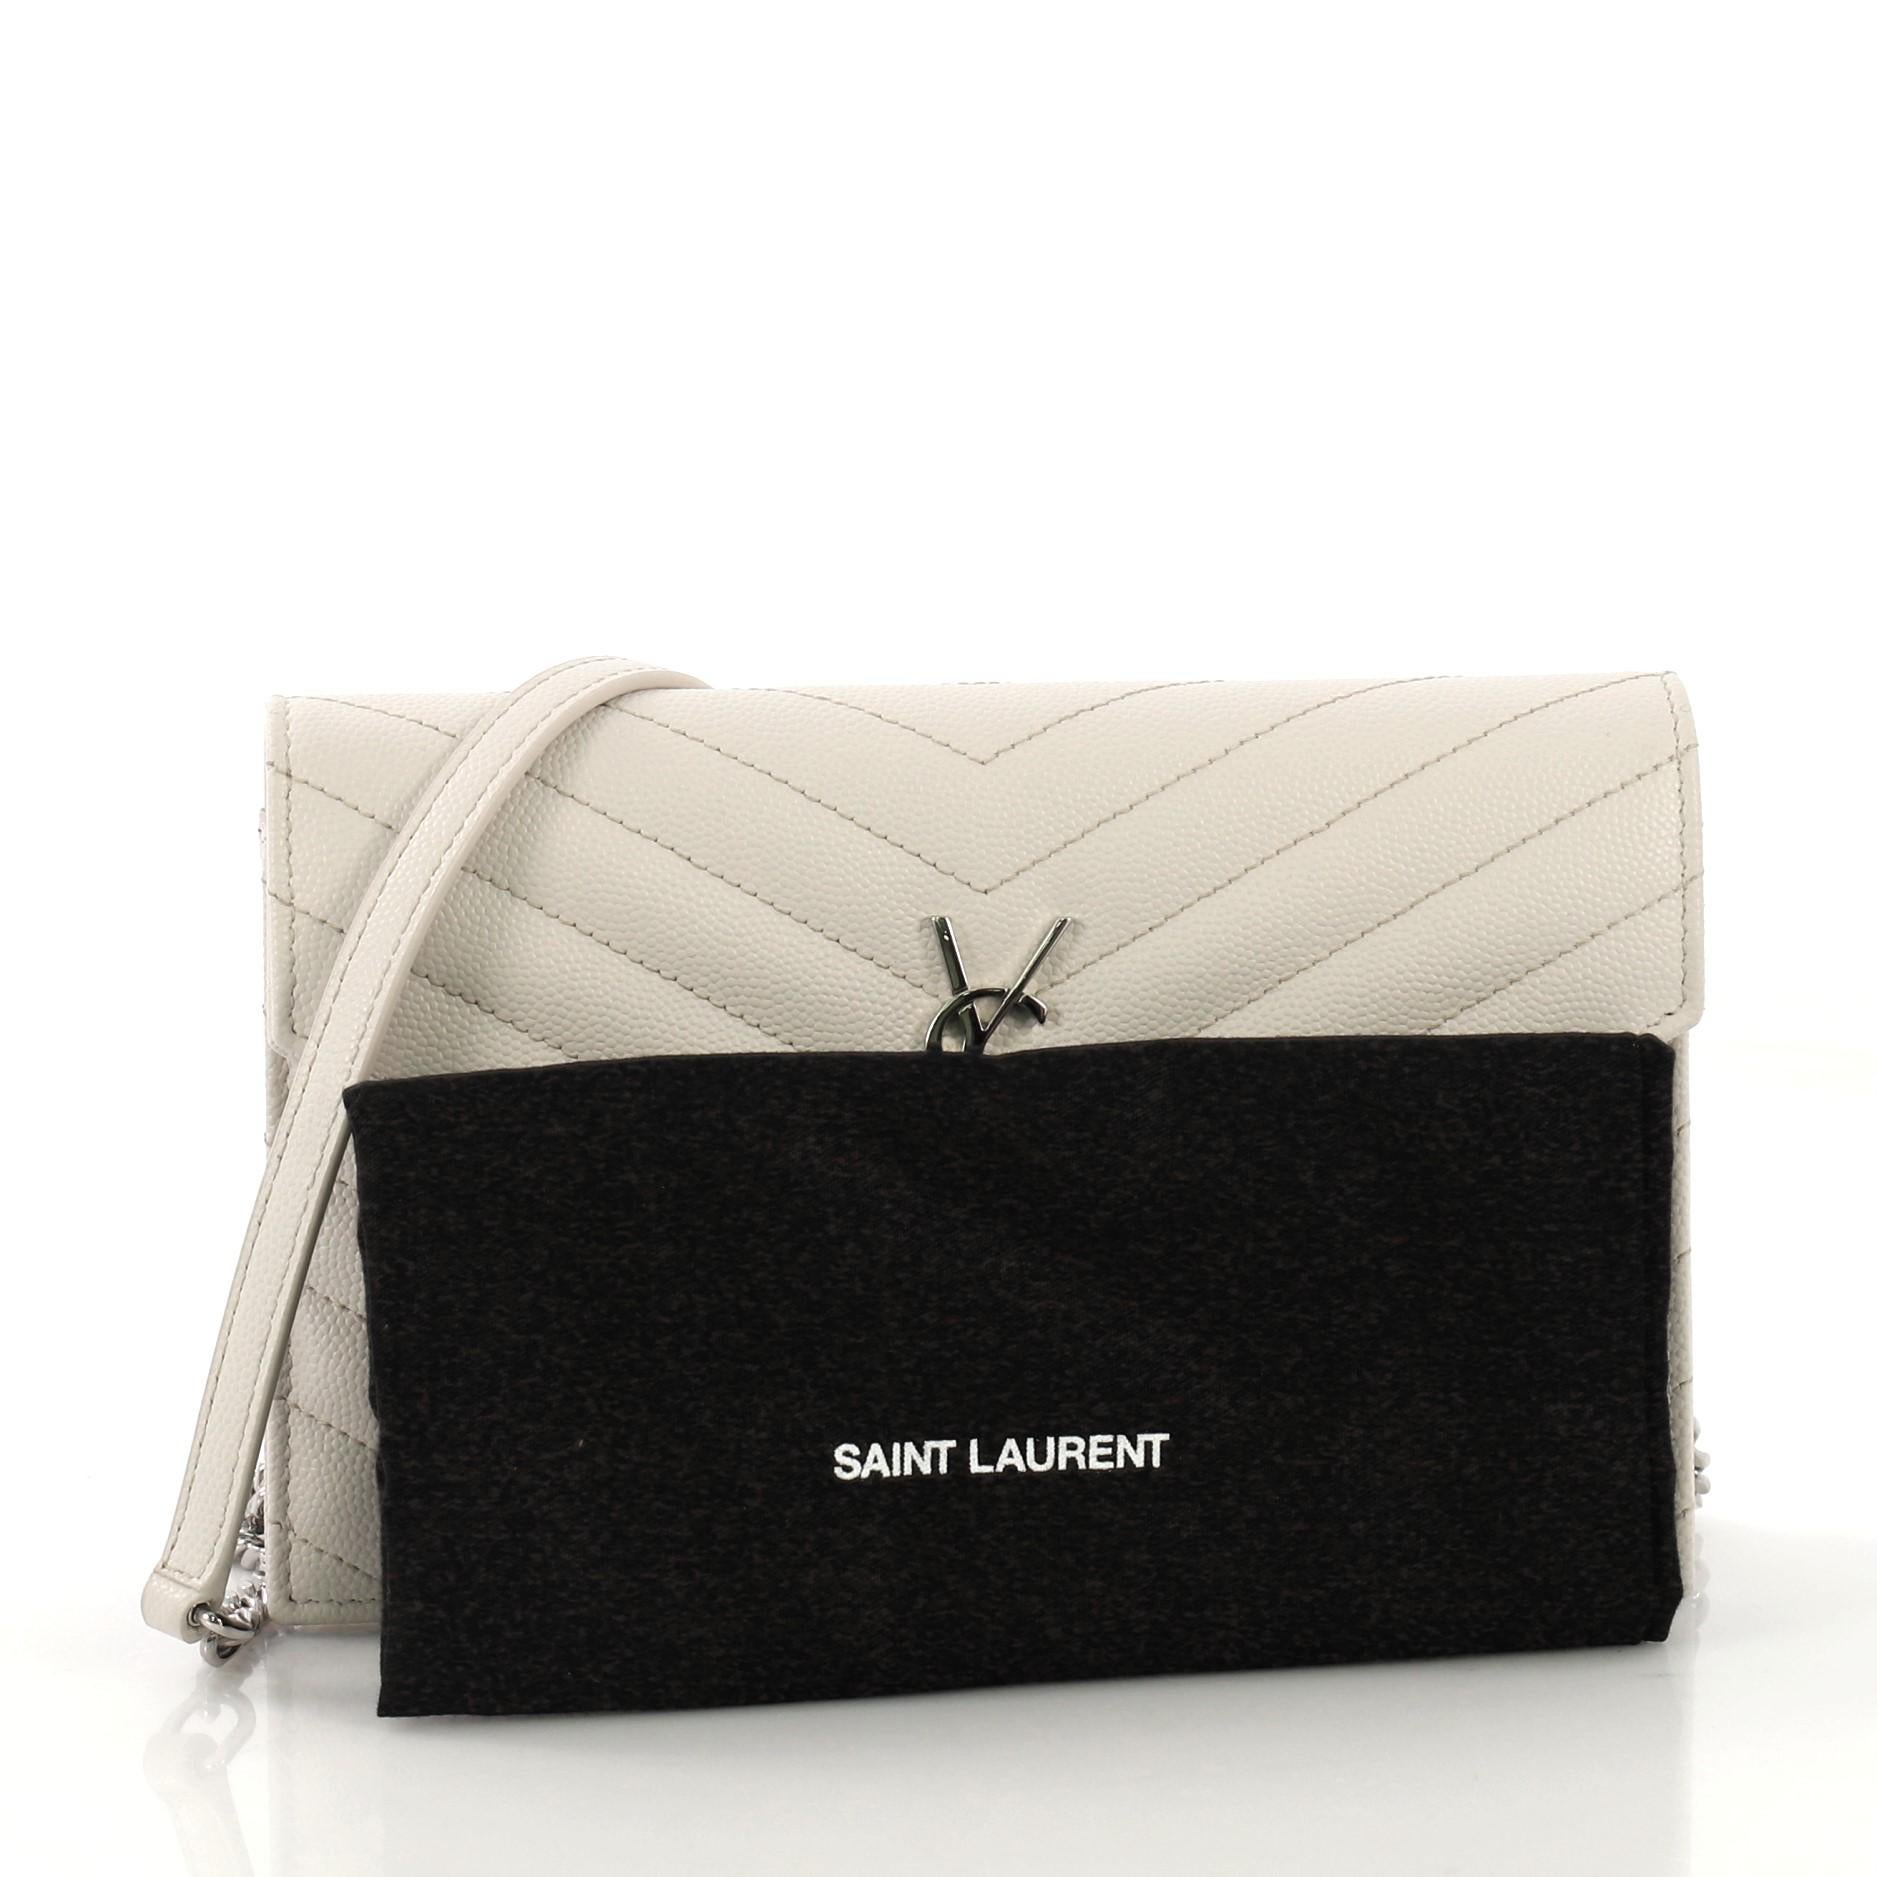 This Saint Laurent Classic Monogram Wallet on Chain Matelasse Chevron Leather Small, crafted from off white matelasse chevron leather, features a chain link strap with leather pad, YSL monogram logo at the front, and silver-tone hardware. Its hidden